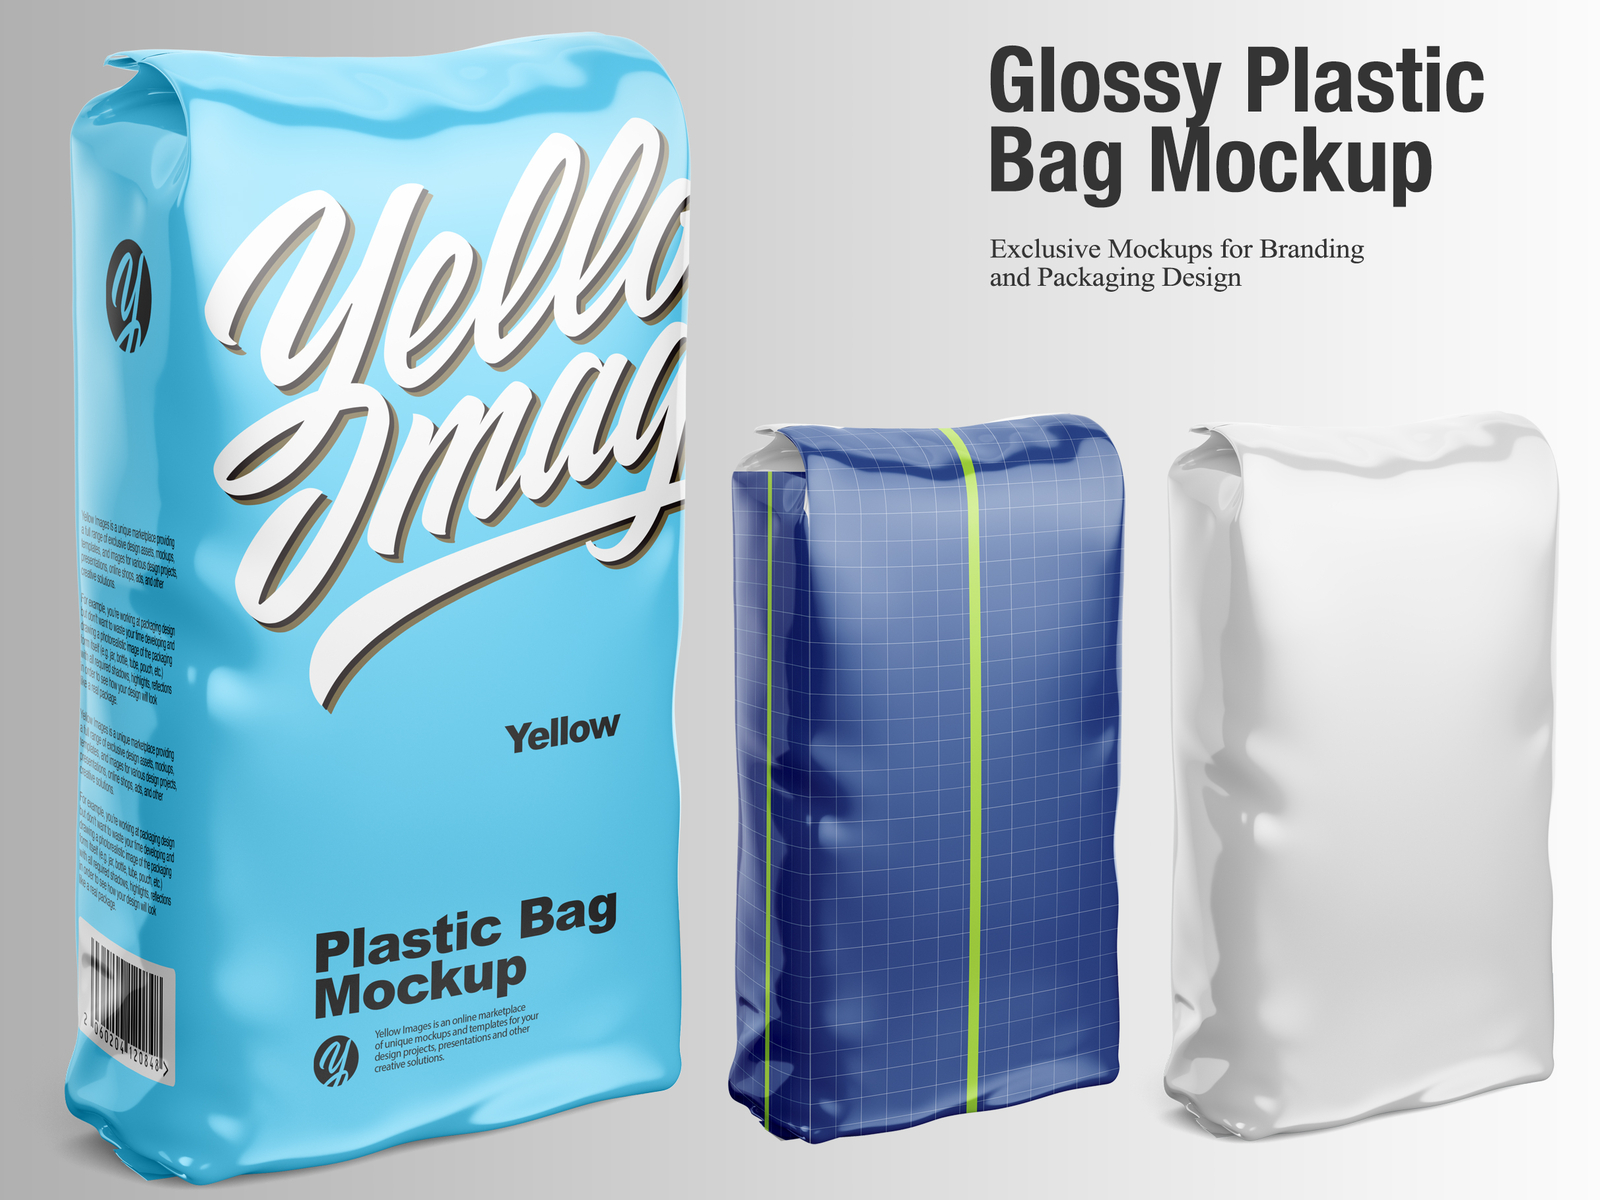 Download Glossy Plastic Bag Mockup By Oleksandr Hlubokyi On Dribbble Yellowimages Mockups